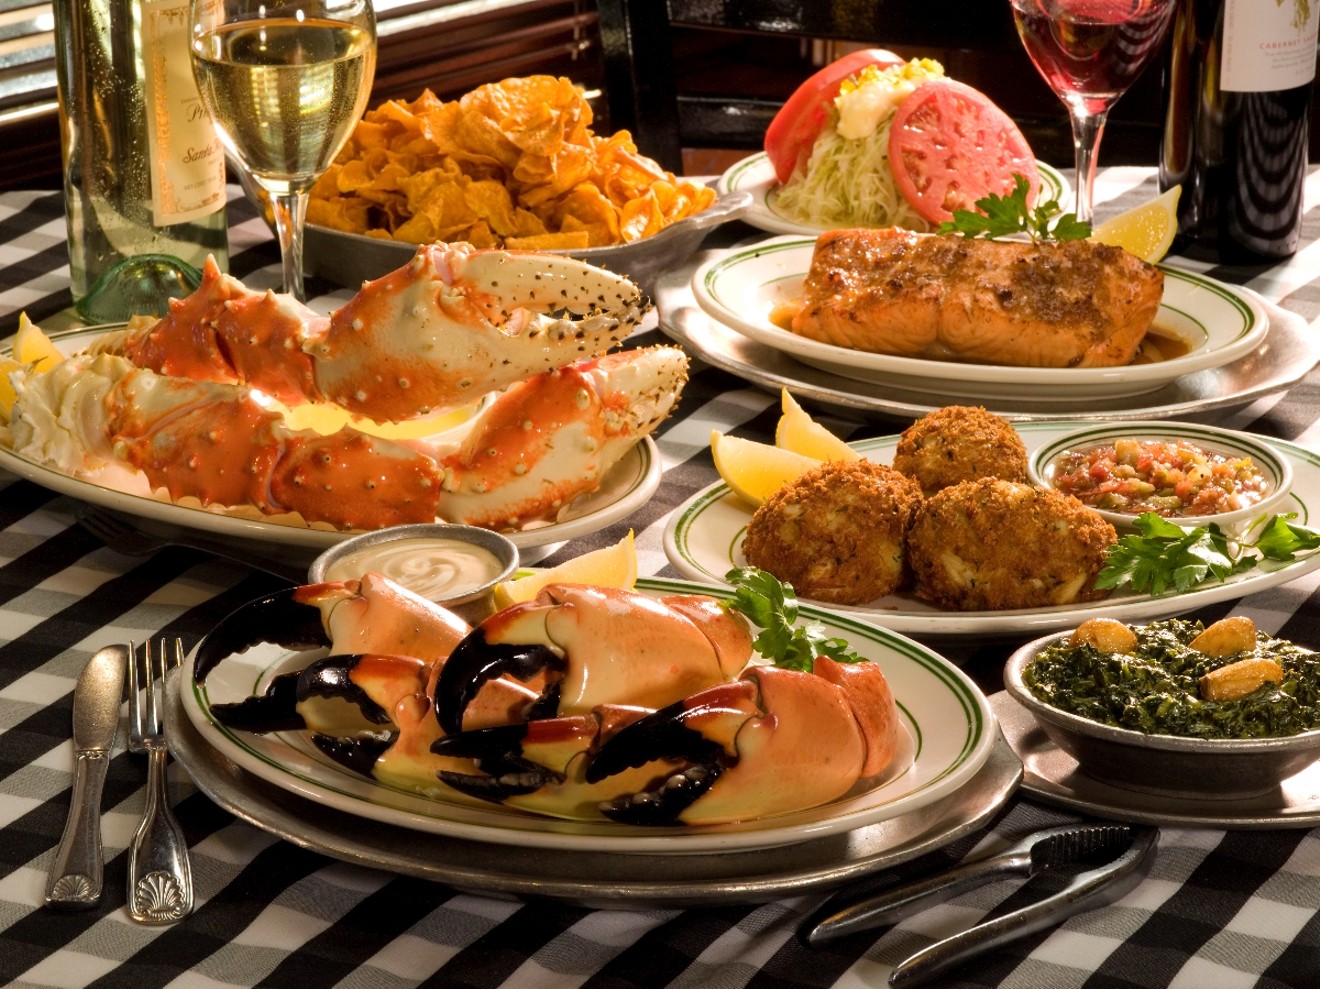 Joe's Stone Crab opens today, October 15, for its 108th season.